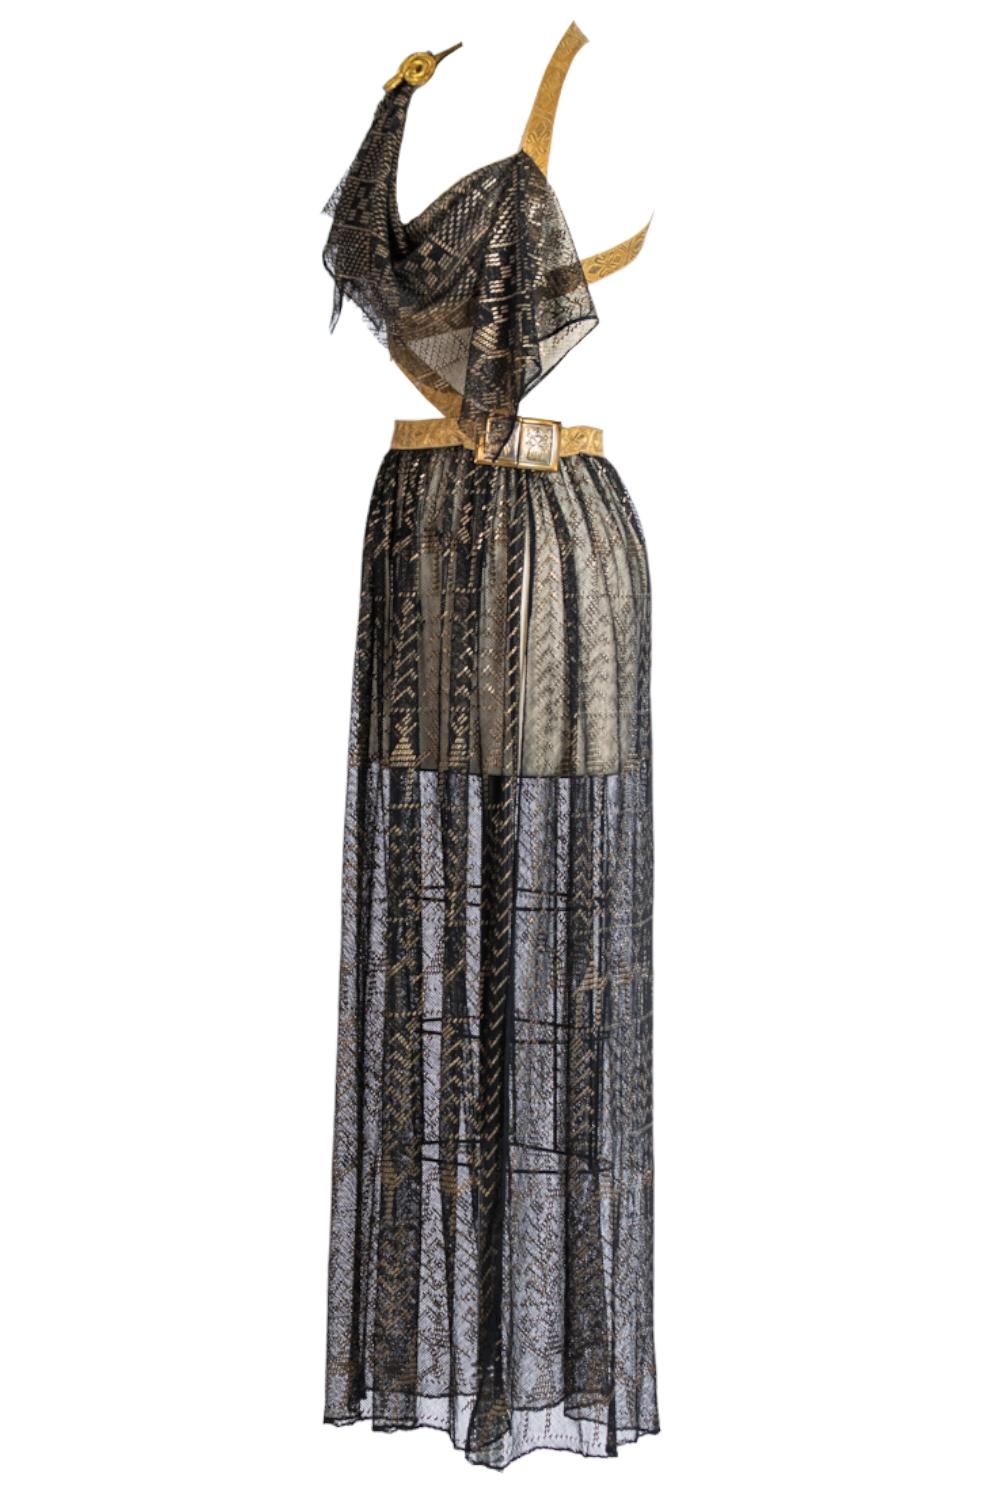 The textiles used to make this gown are 100 years old and have built up a beautiful antique patina to the gilt brass details. MORPHEW ATELIER Black & Gold Cotton Net Antique Egyptian Assuit Gown With Military Brass Braid Epaulet 